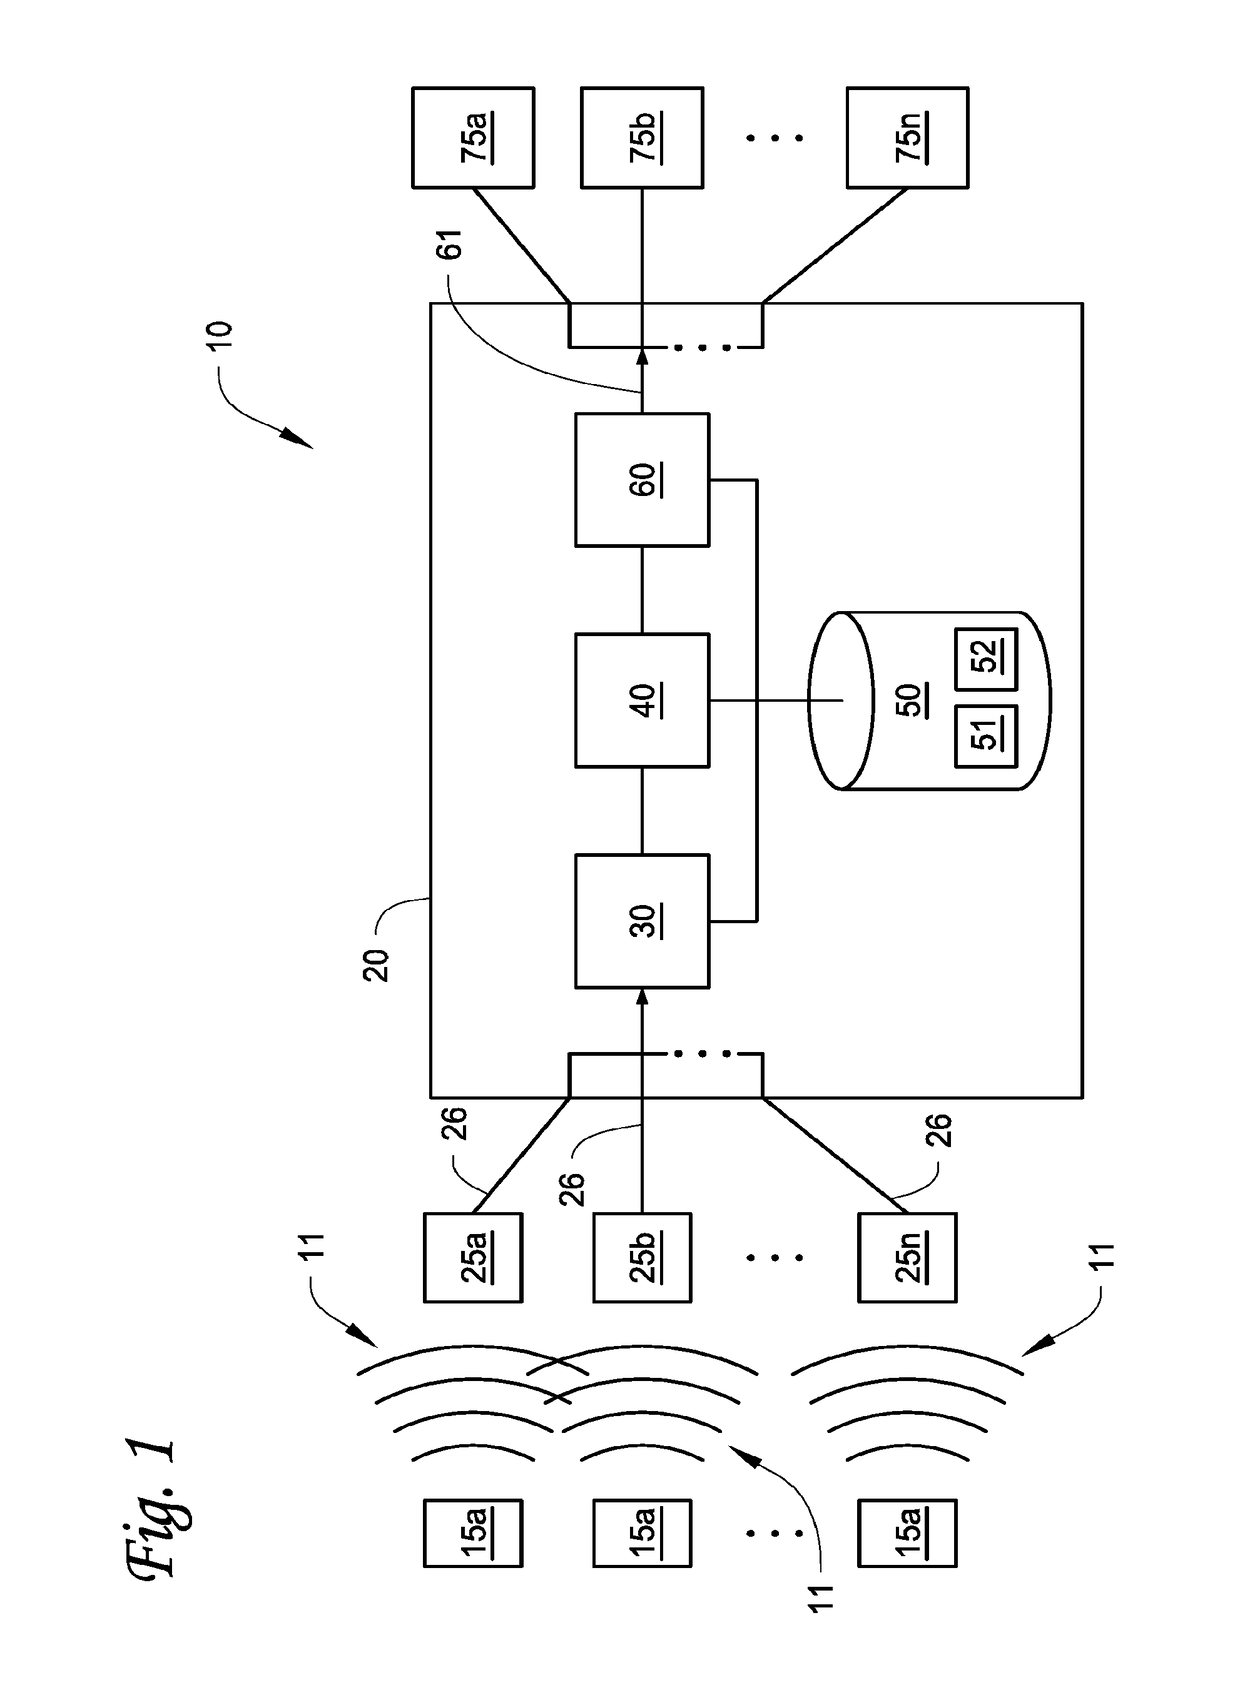 Occupancy sensing and building control using mobile devices